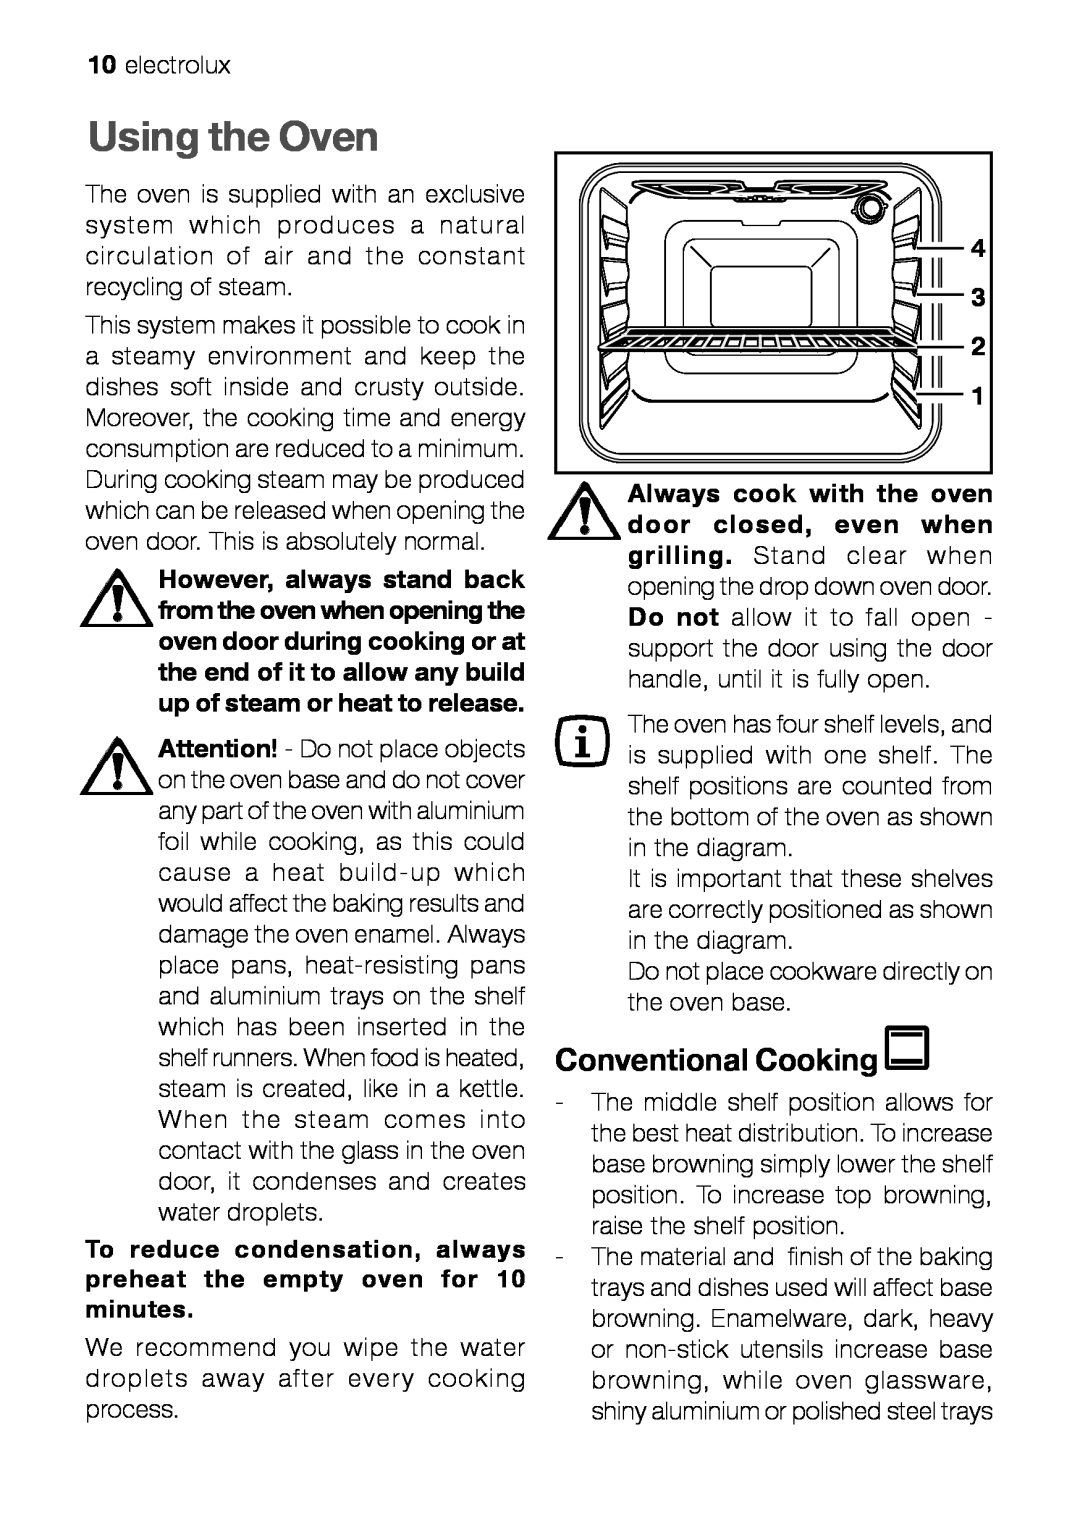 Electrolux EOB 21001 user manual Using the Oven, Conventional Cooking 